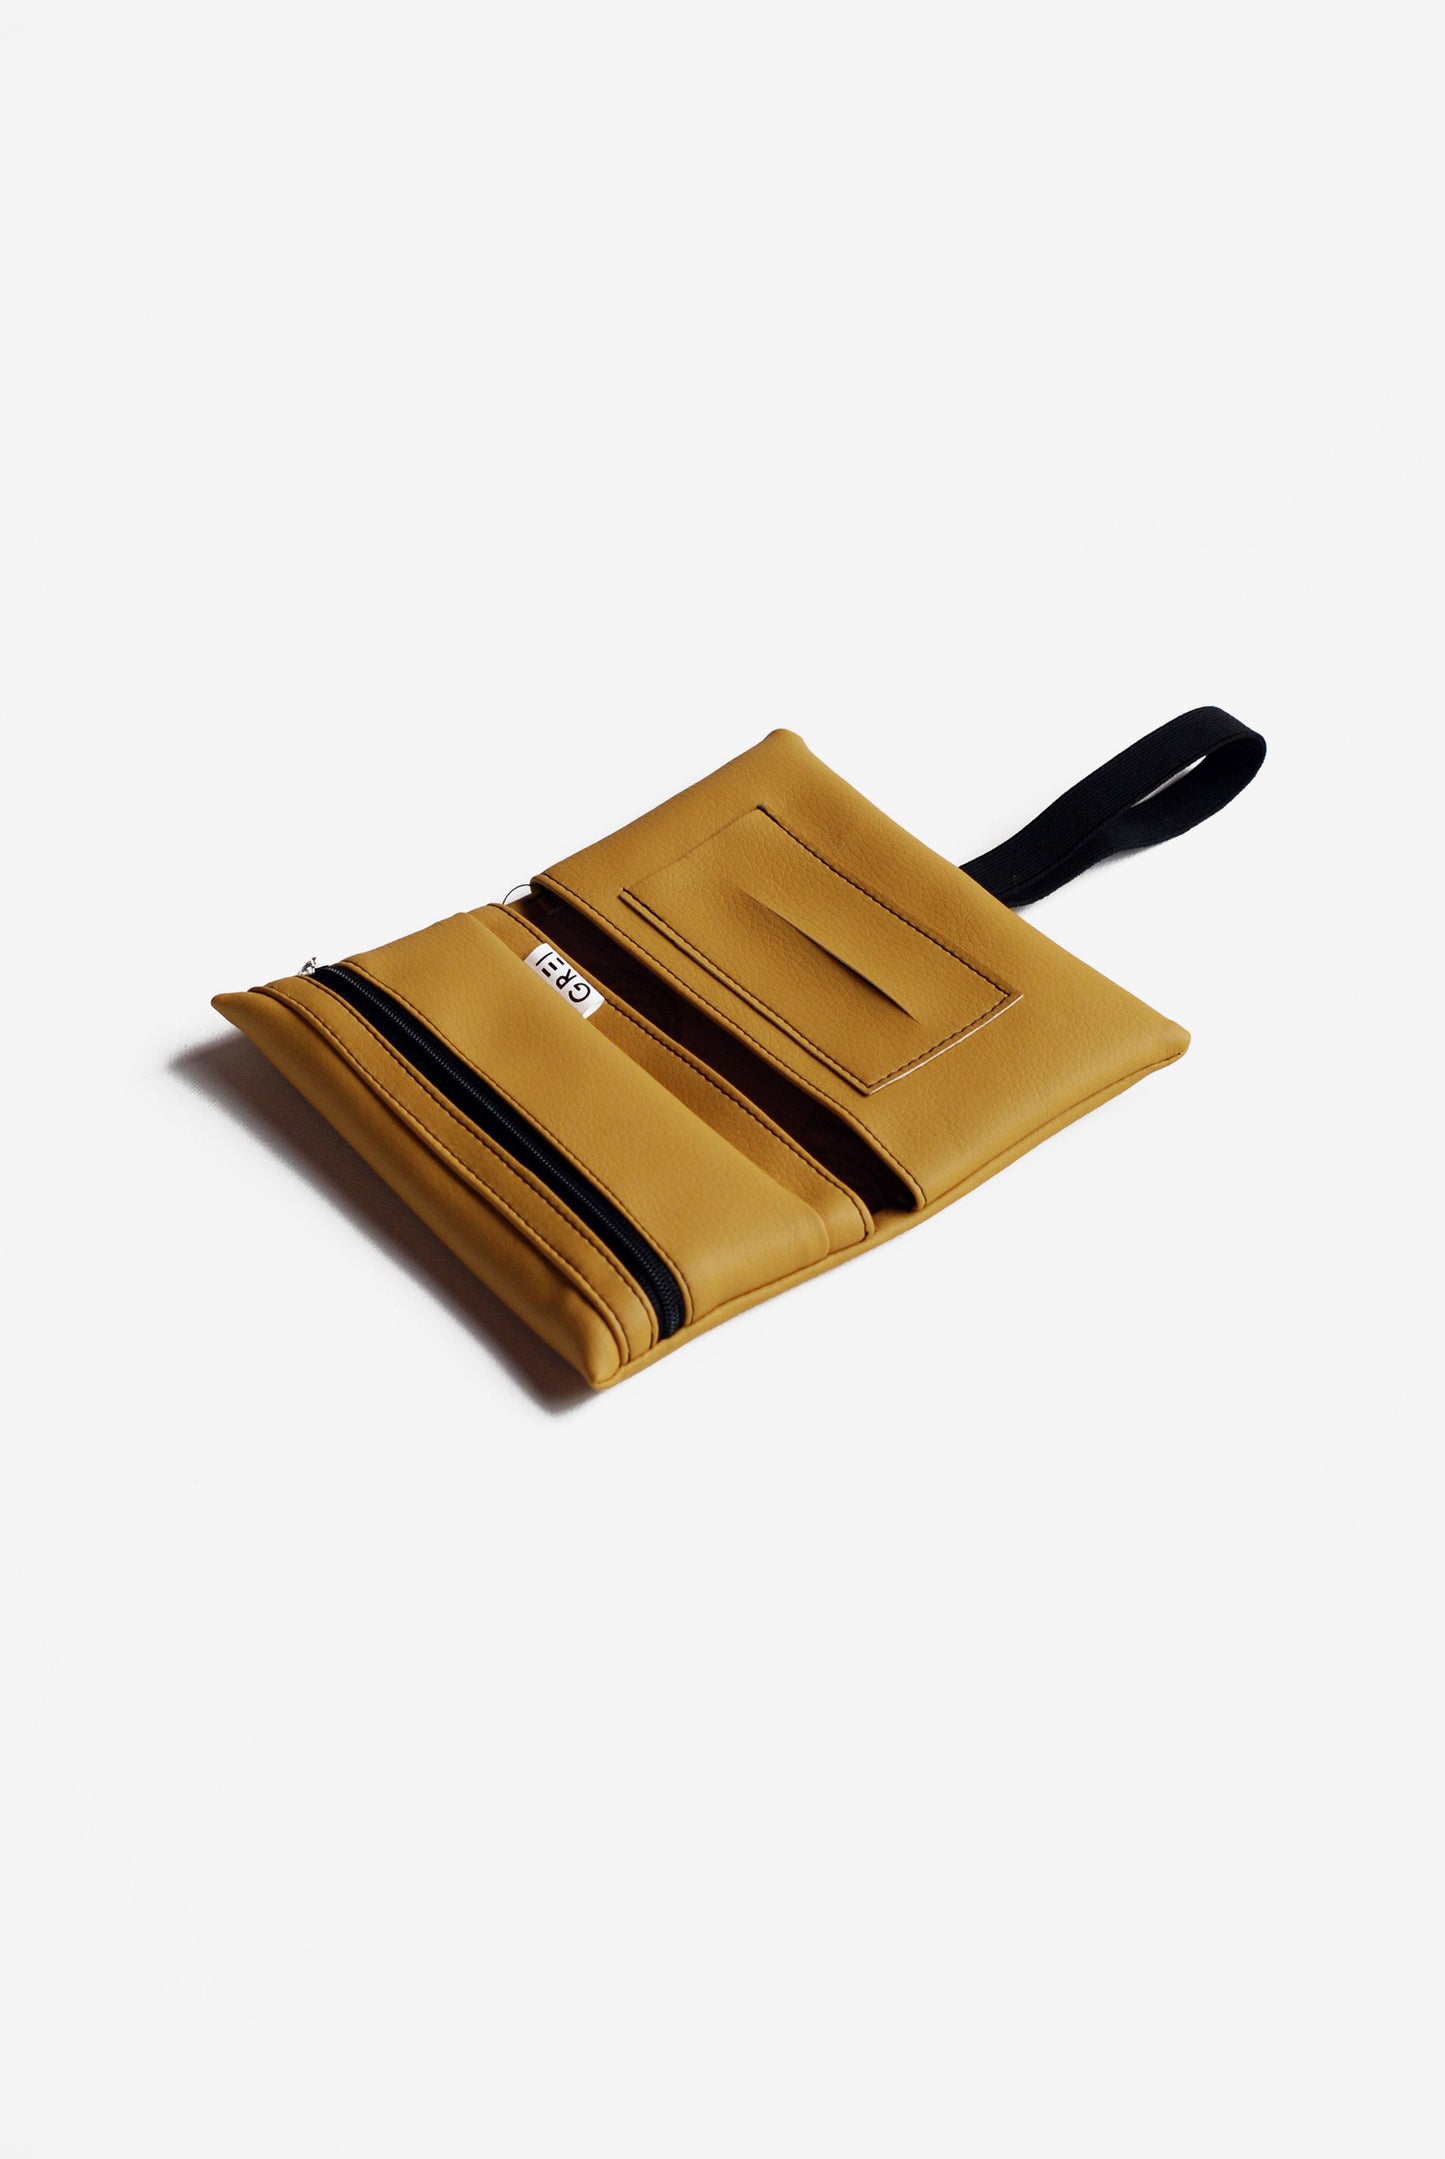 GREI Tobacco pouch Yellow